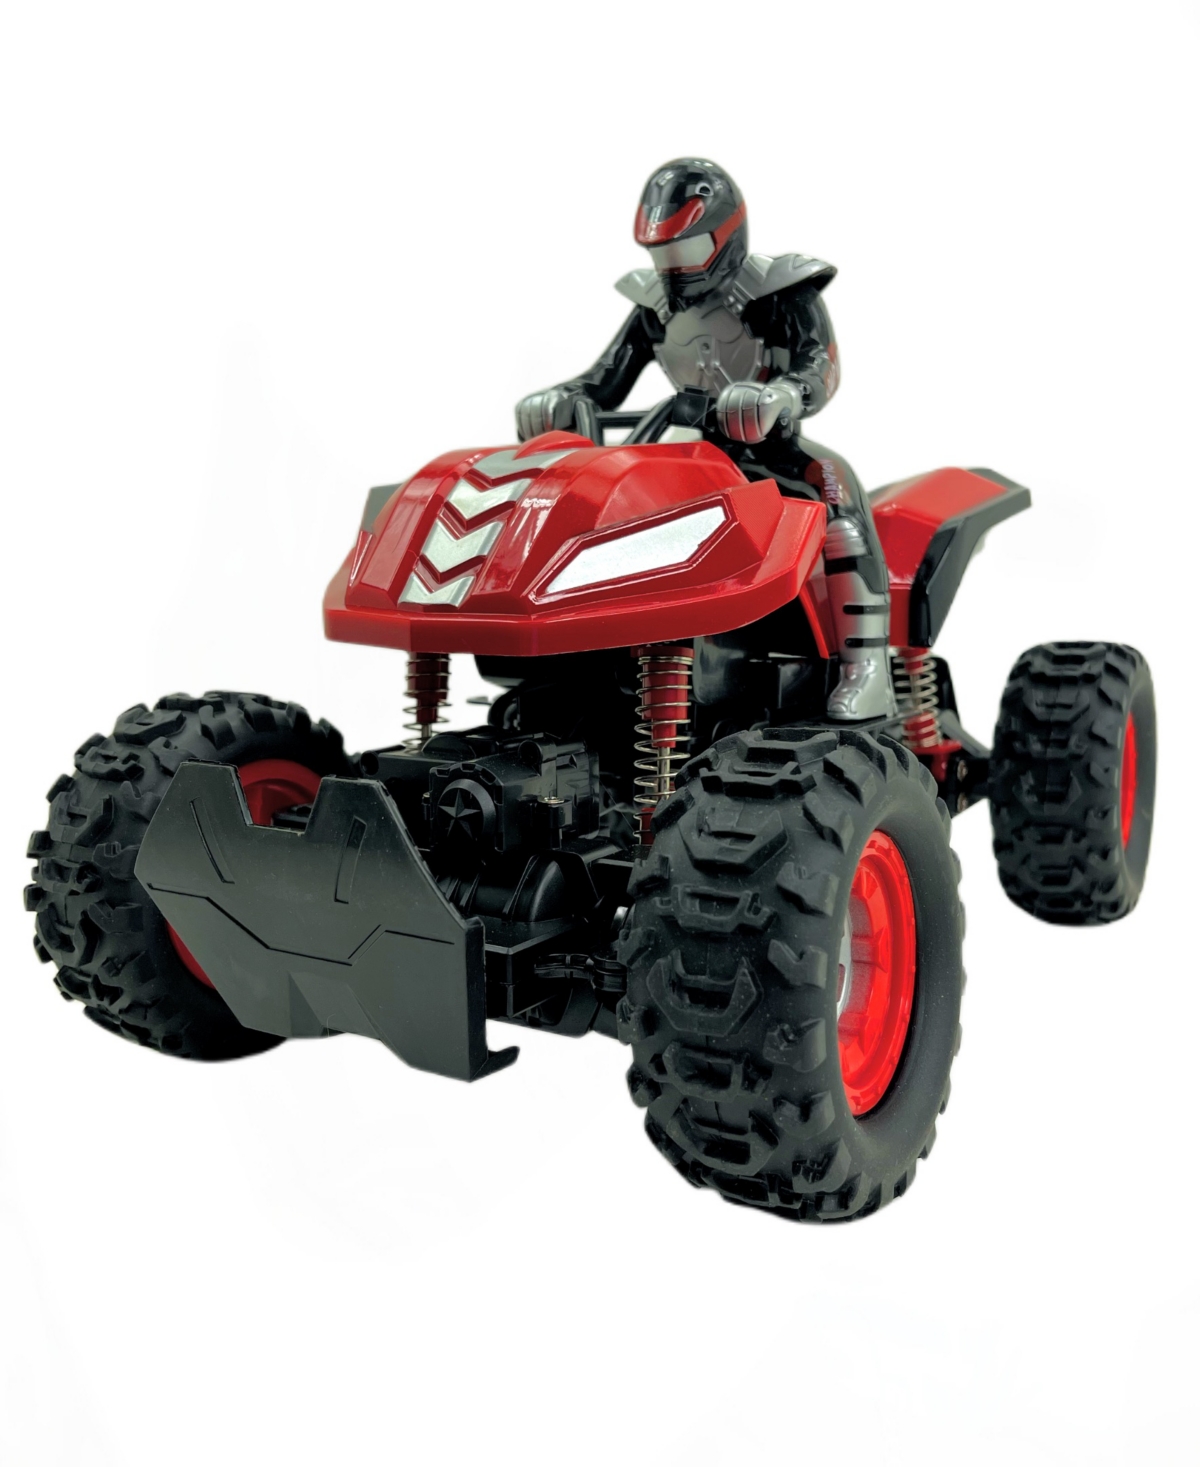 Big Daddy Babies' Large Atv Remote Control Four Wheeler For Off Road Driving In Multi Colored Plastic